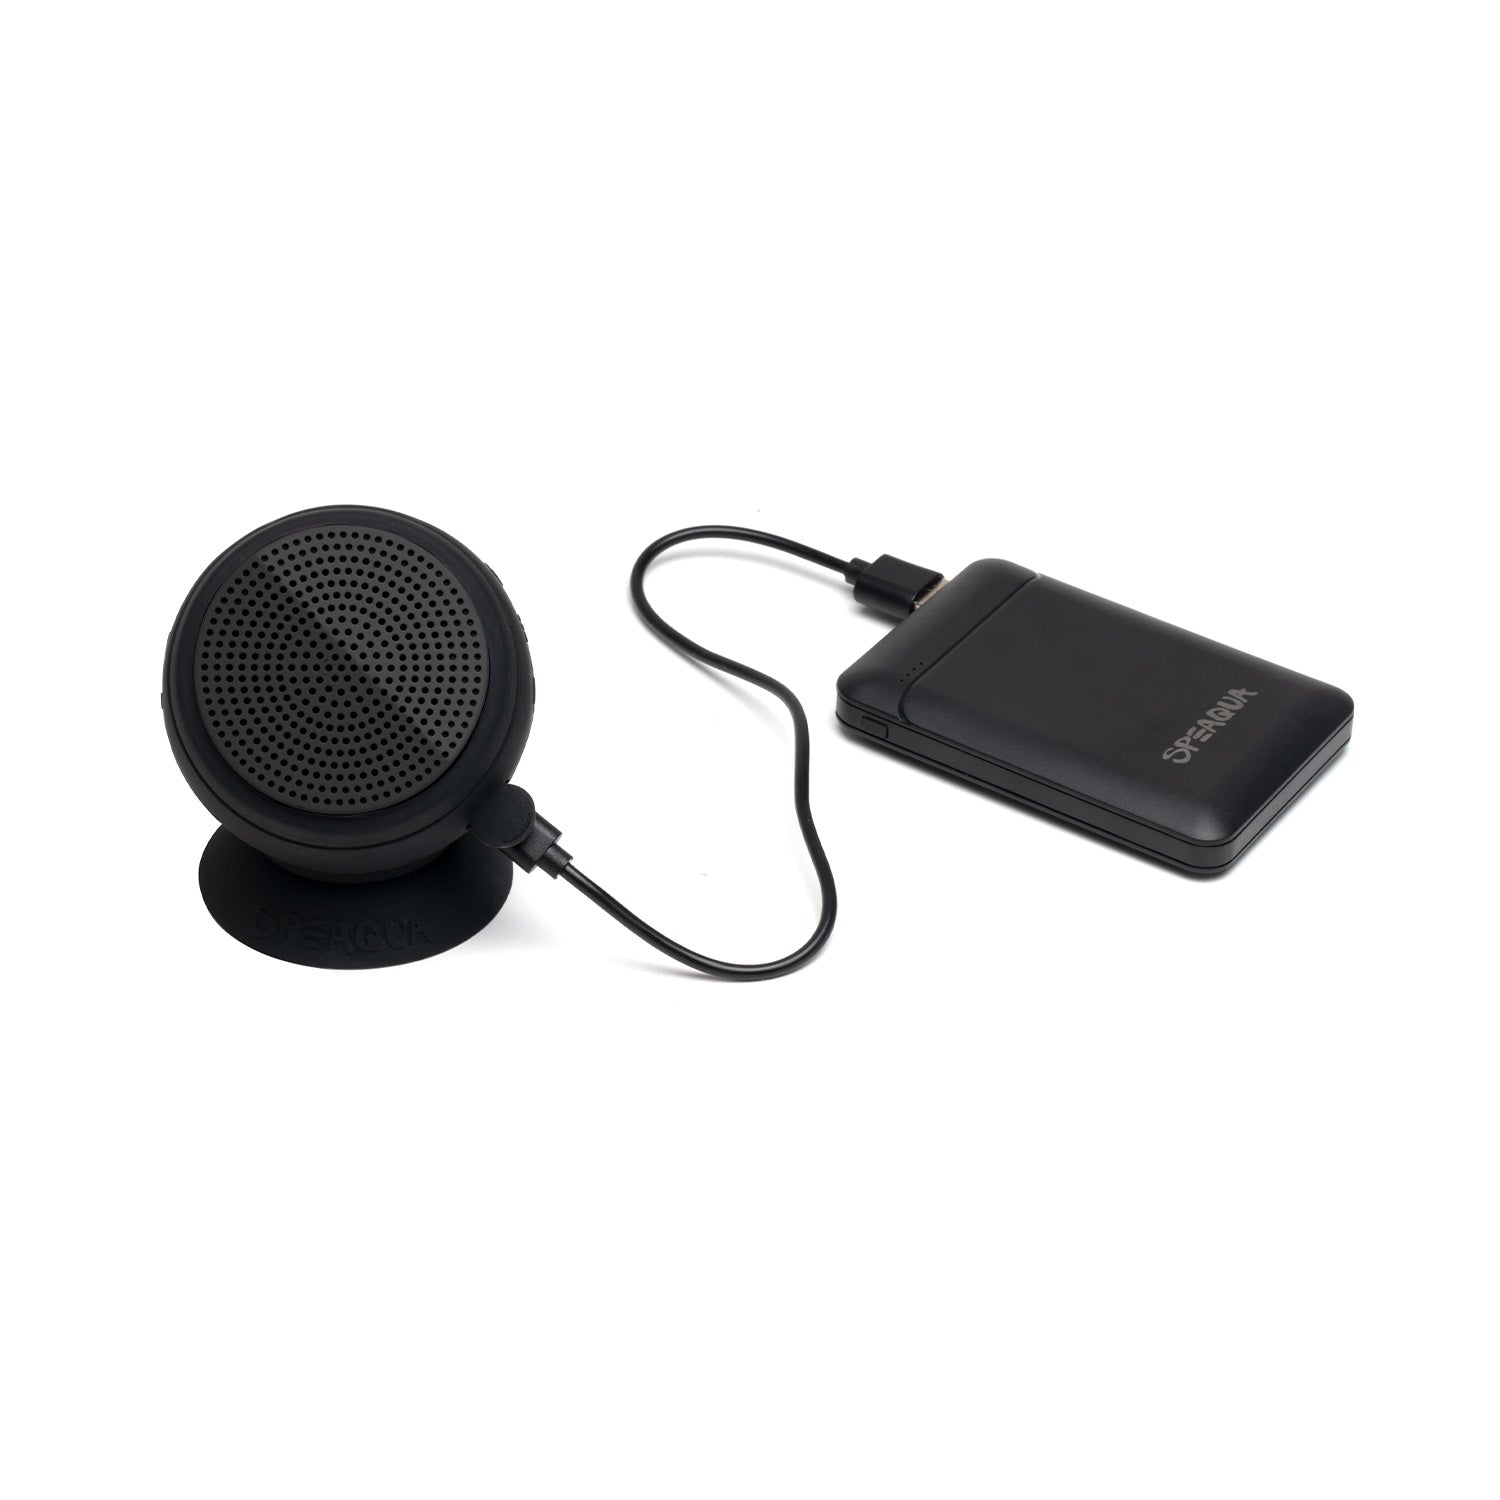 Aver Speaker System - 20 W RMS - Portable - Battery Rechargeable